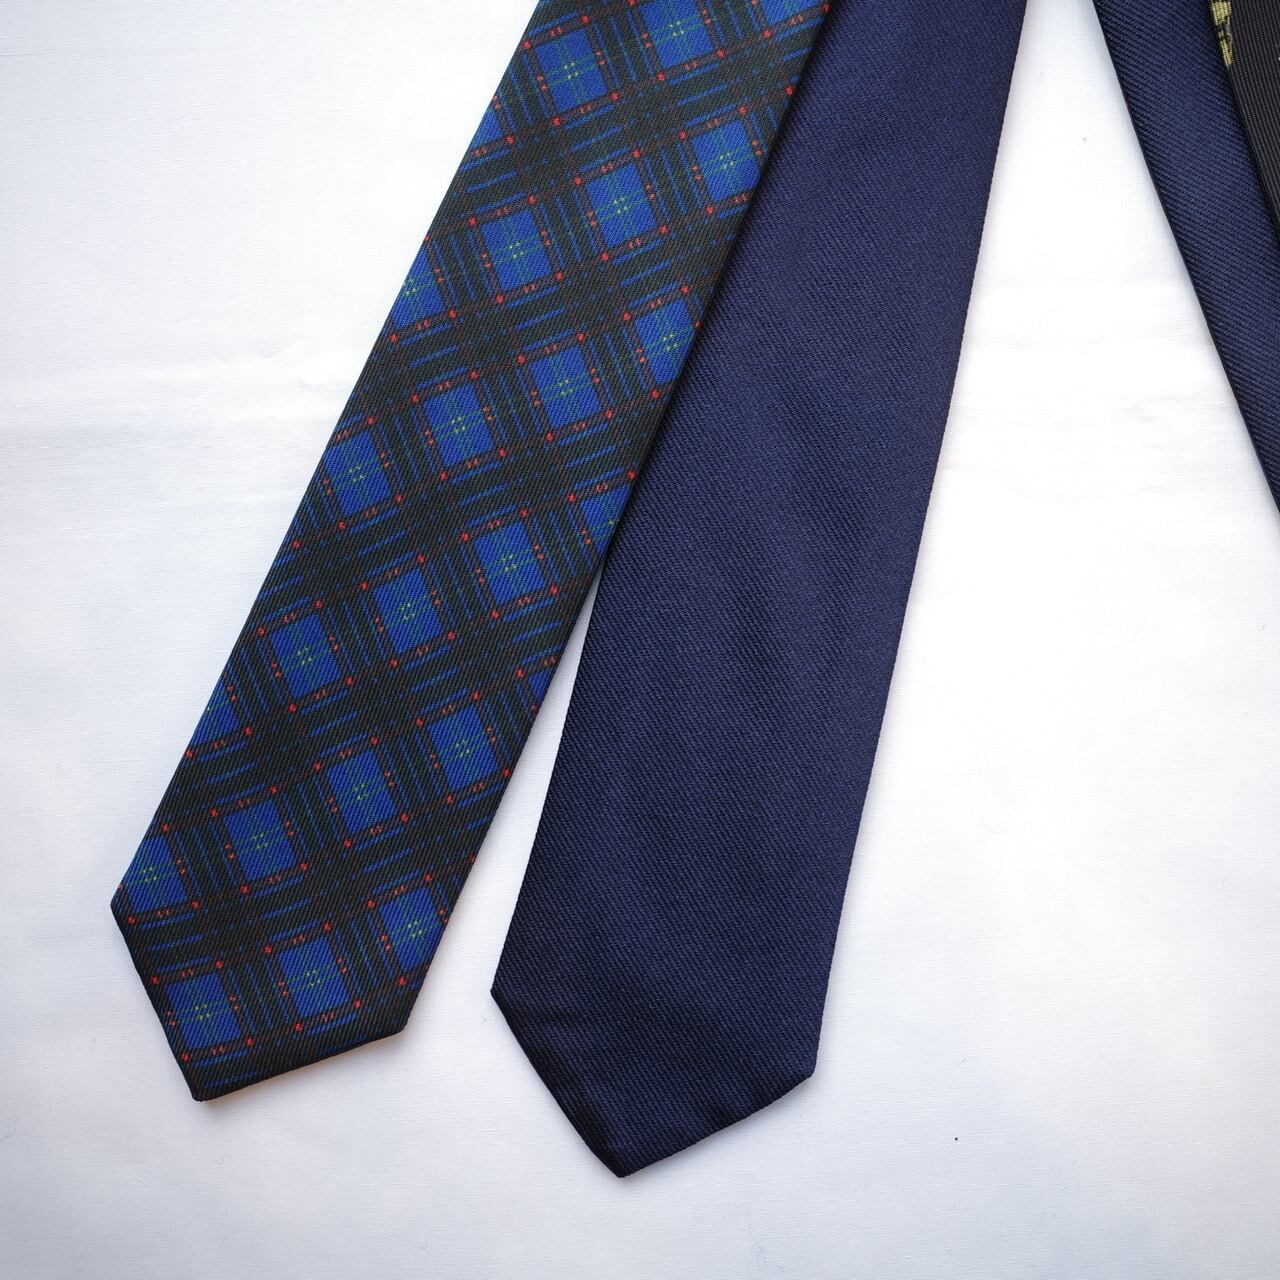 KENNETH FIELD(ケネスフィールド) / 3FACE TIE PLAIDS/HUNTING/SOLID -NAVY- | Signs